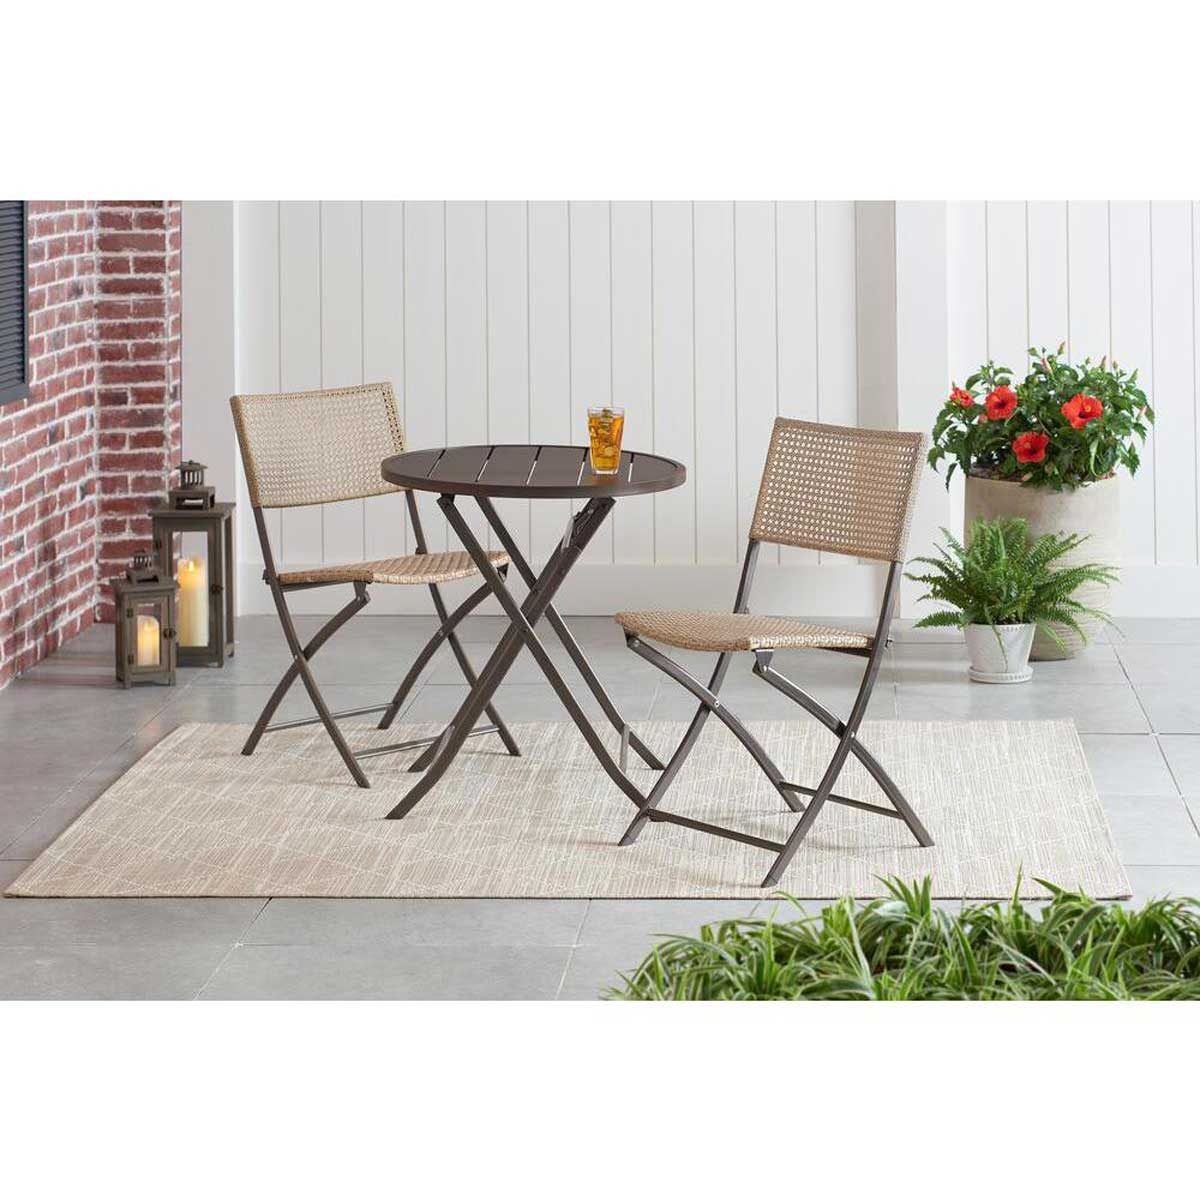 10 Best Outdoor Folding Chairs for 2022 | The Family Handyman